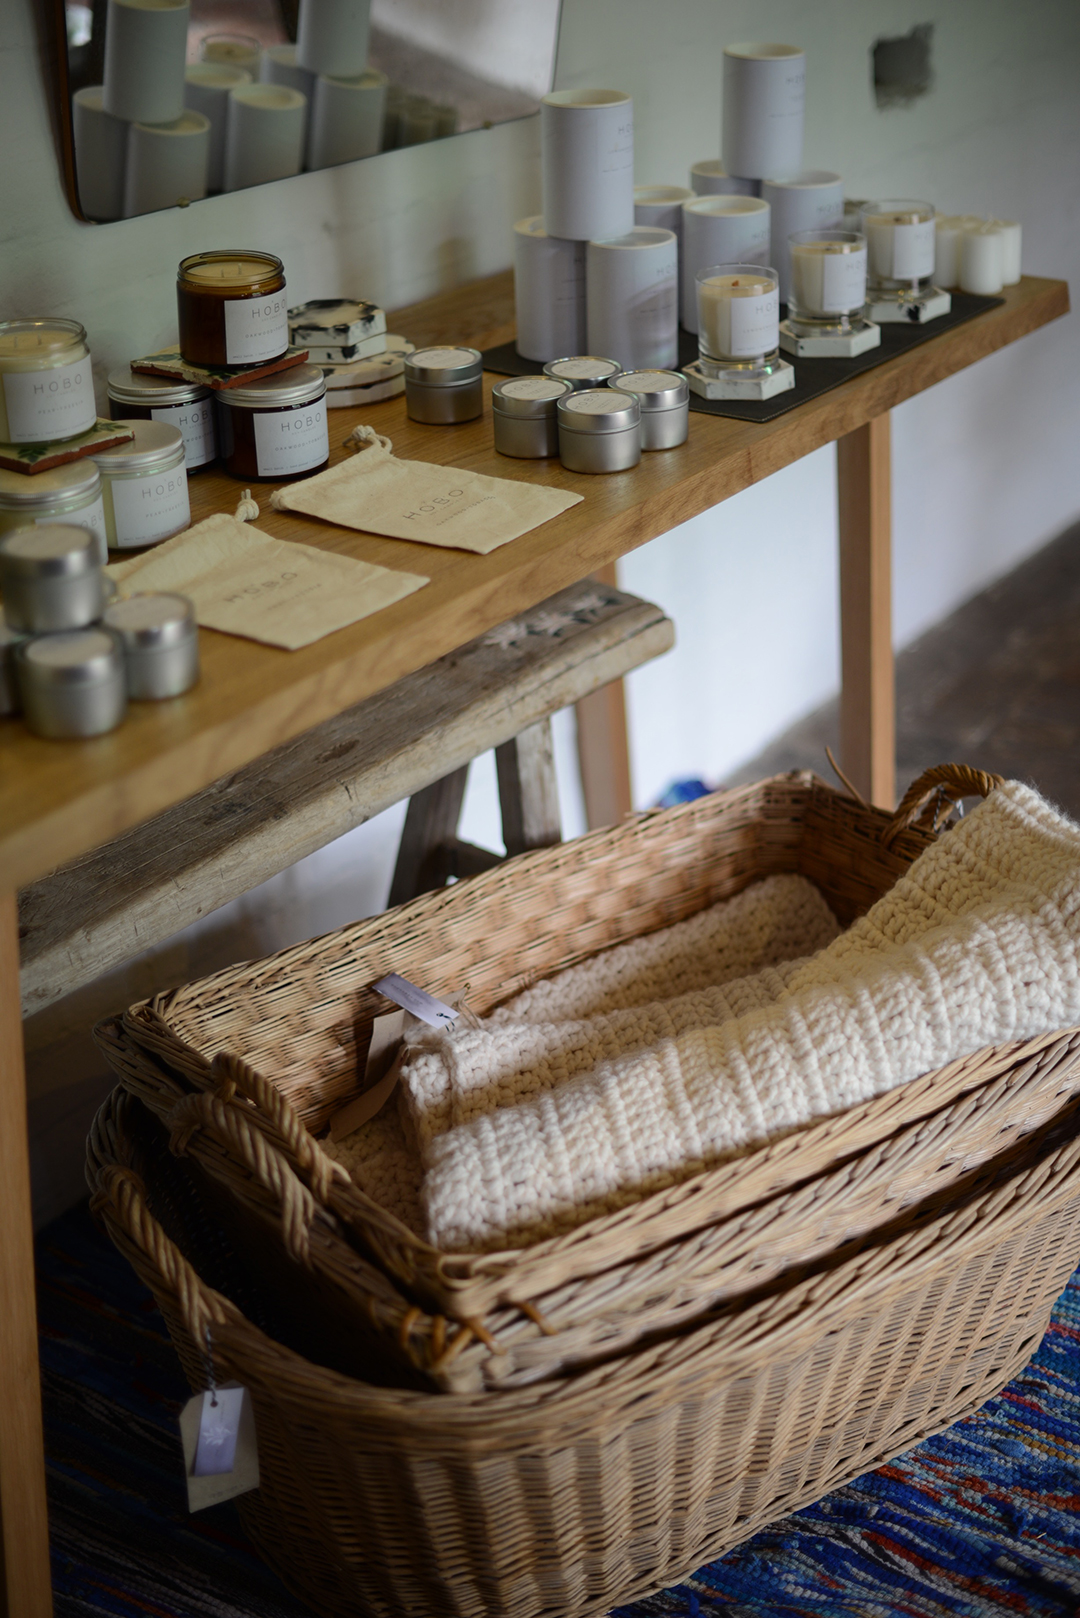 &Hobbs homewares store in Shere curated by Libby Hobbs and photographed by sara delaney